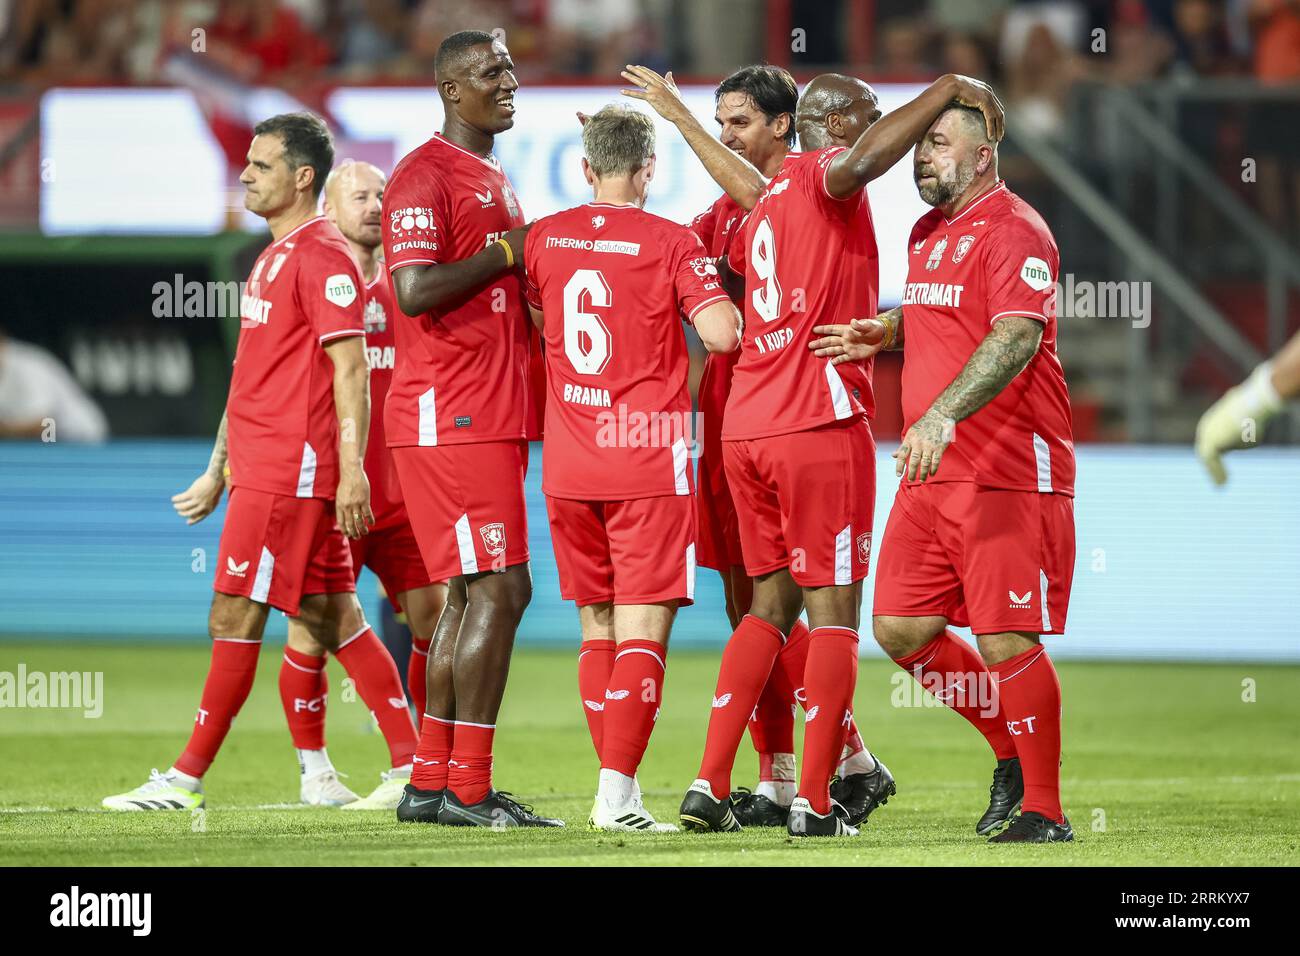 ENSCHEDE - Wout Brama amidst Douglas, Bryan Ruiz, Blaise Nkufo, Theo Janssen (l-r) during Wout Brama's farewell match in De Grolsch Veste. Brama played fifteen seasons and almost four hundred matches in the shirt of FC Twente. For this occasion, a lot of players from his career returned to play a match with and against him. ANP VINCENT JANNINK netherlands out - belgium out Stock Photo